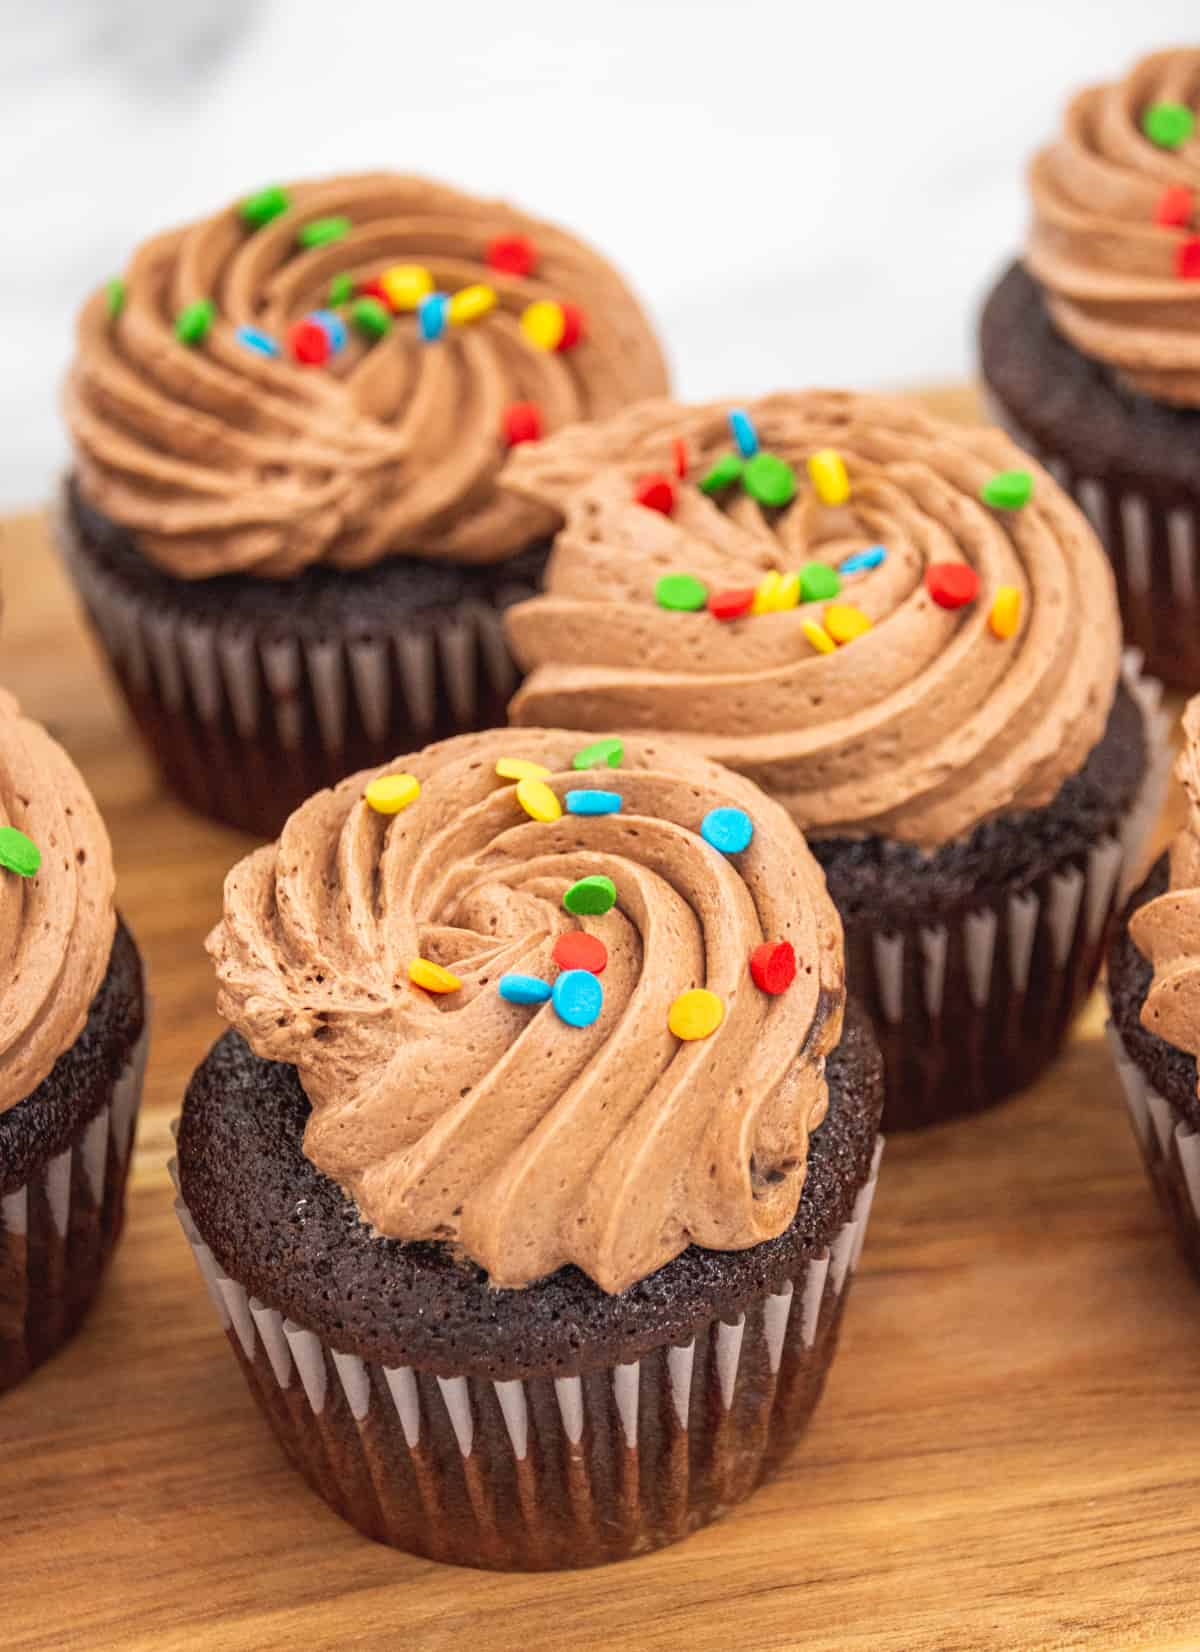 Whipped chocolate buttercream with sprinkles.